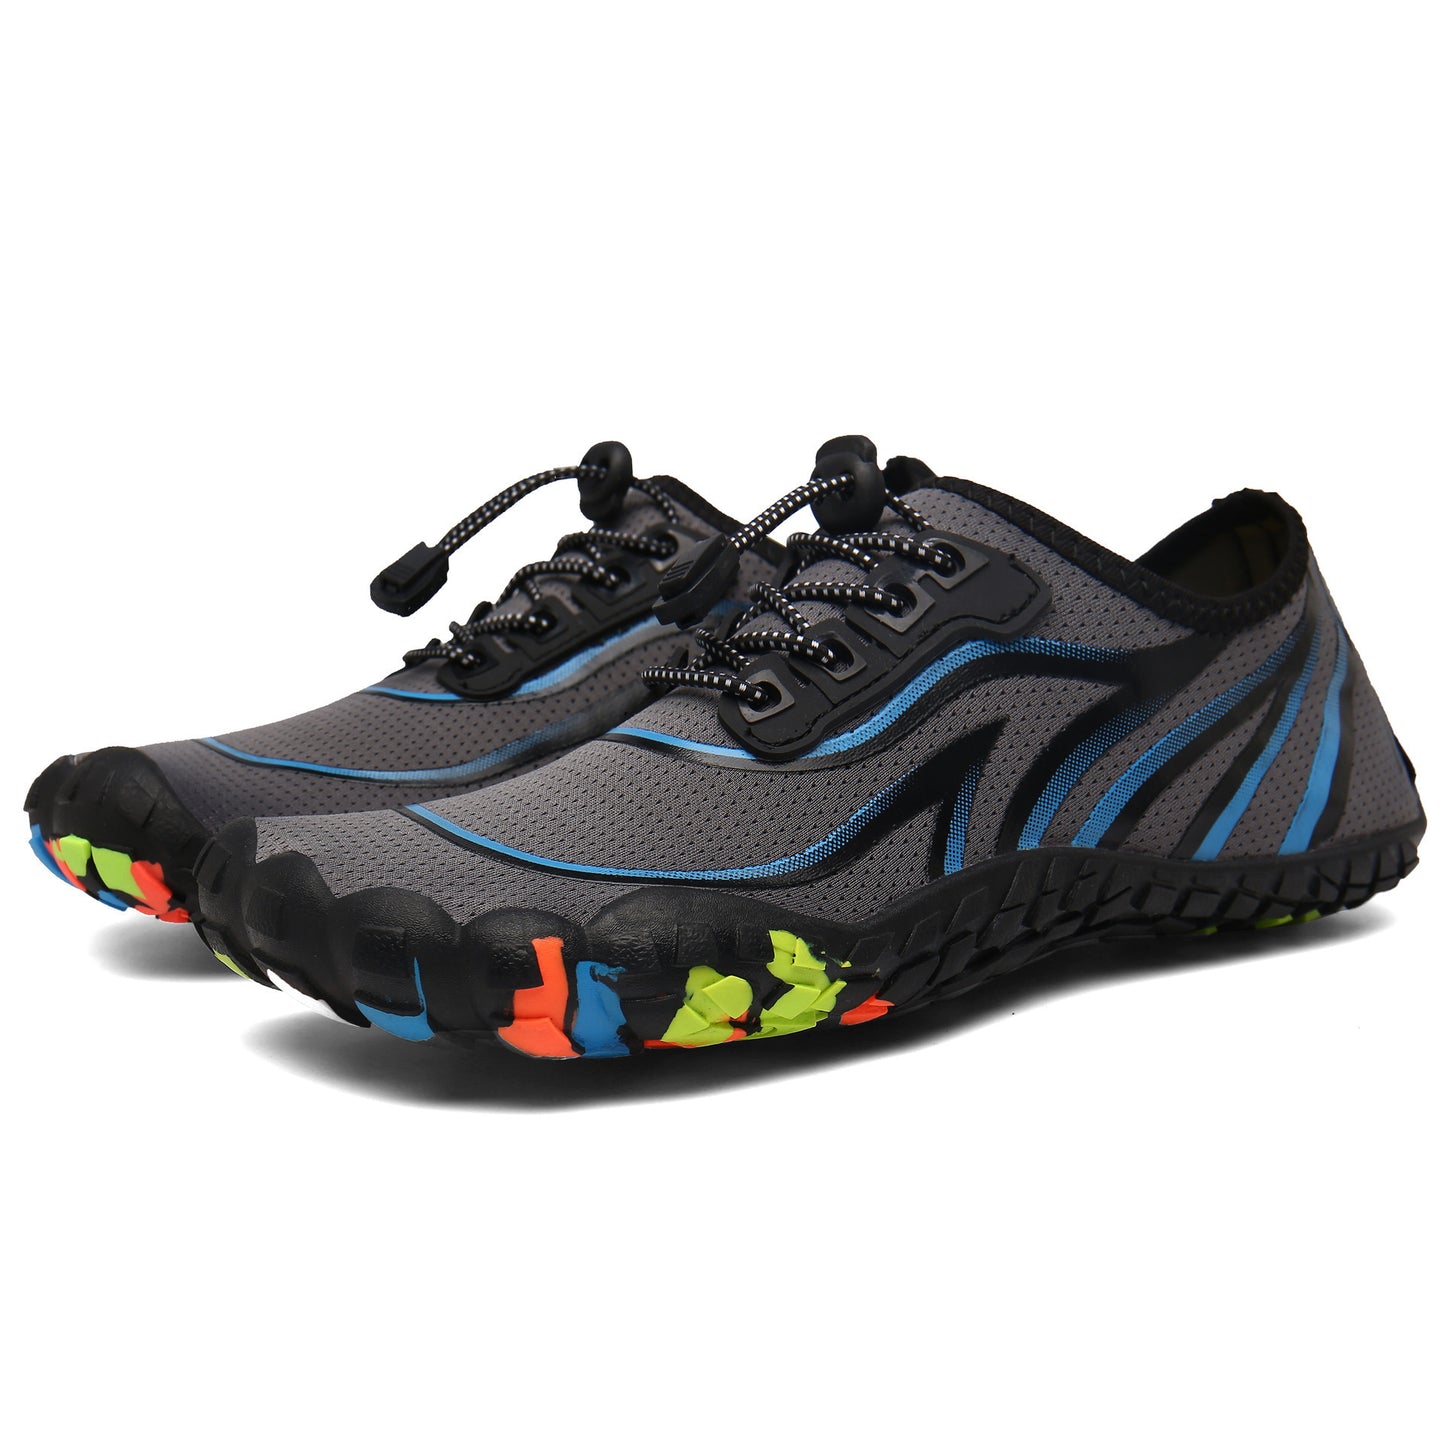 Upstream Breathable Water Diving Shoes